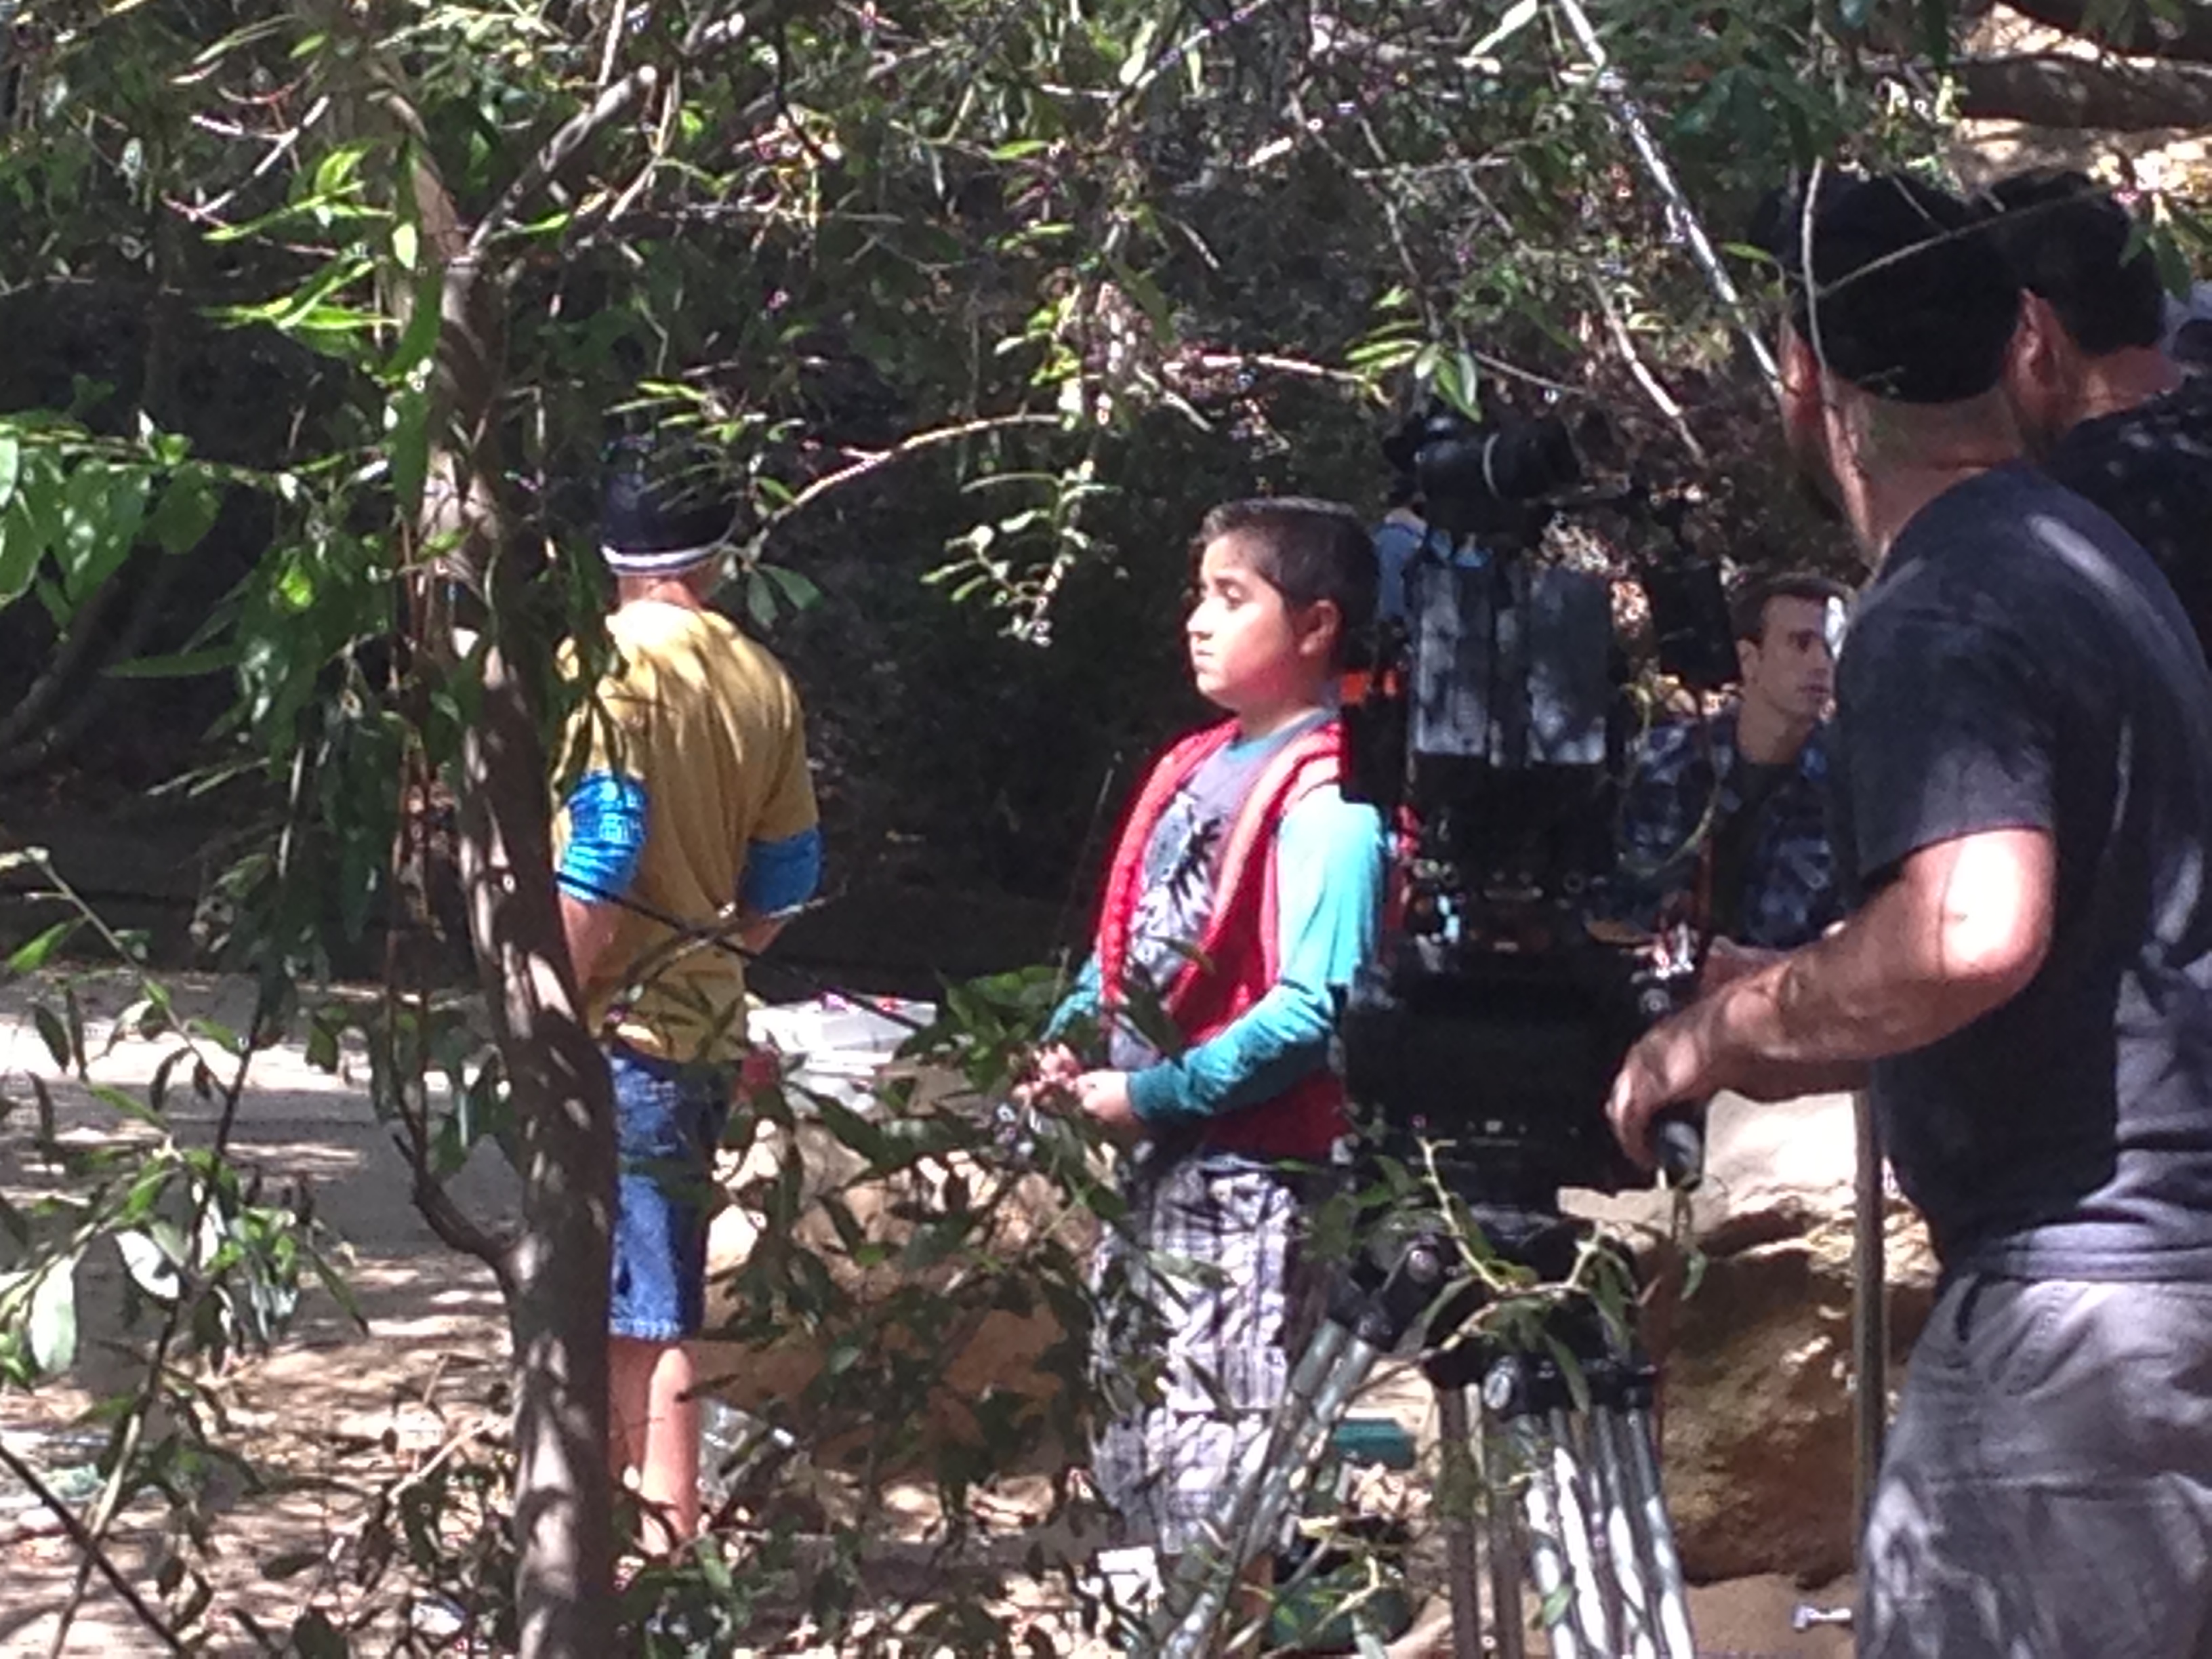 Christian filming a Cartoon Network commercial. Christian is the boy who fishes the monster out of the lake.